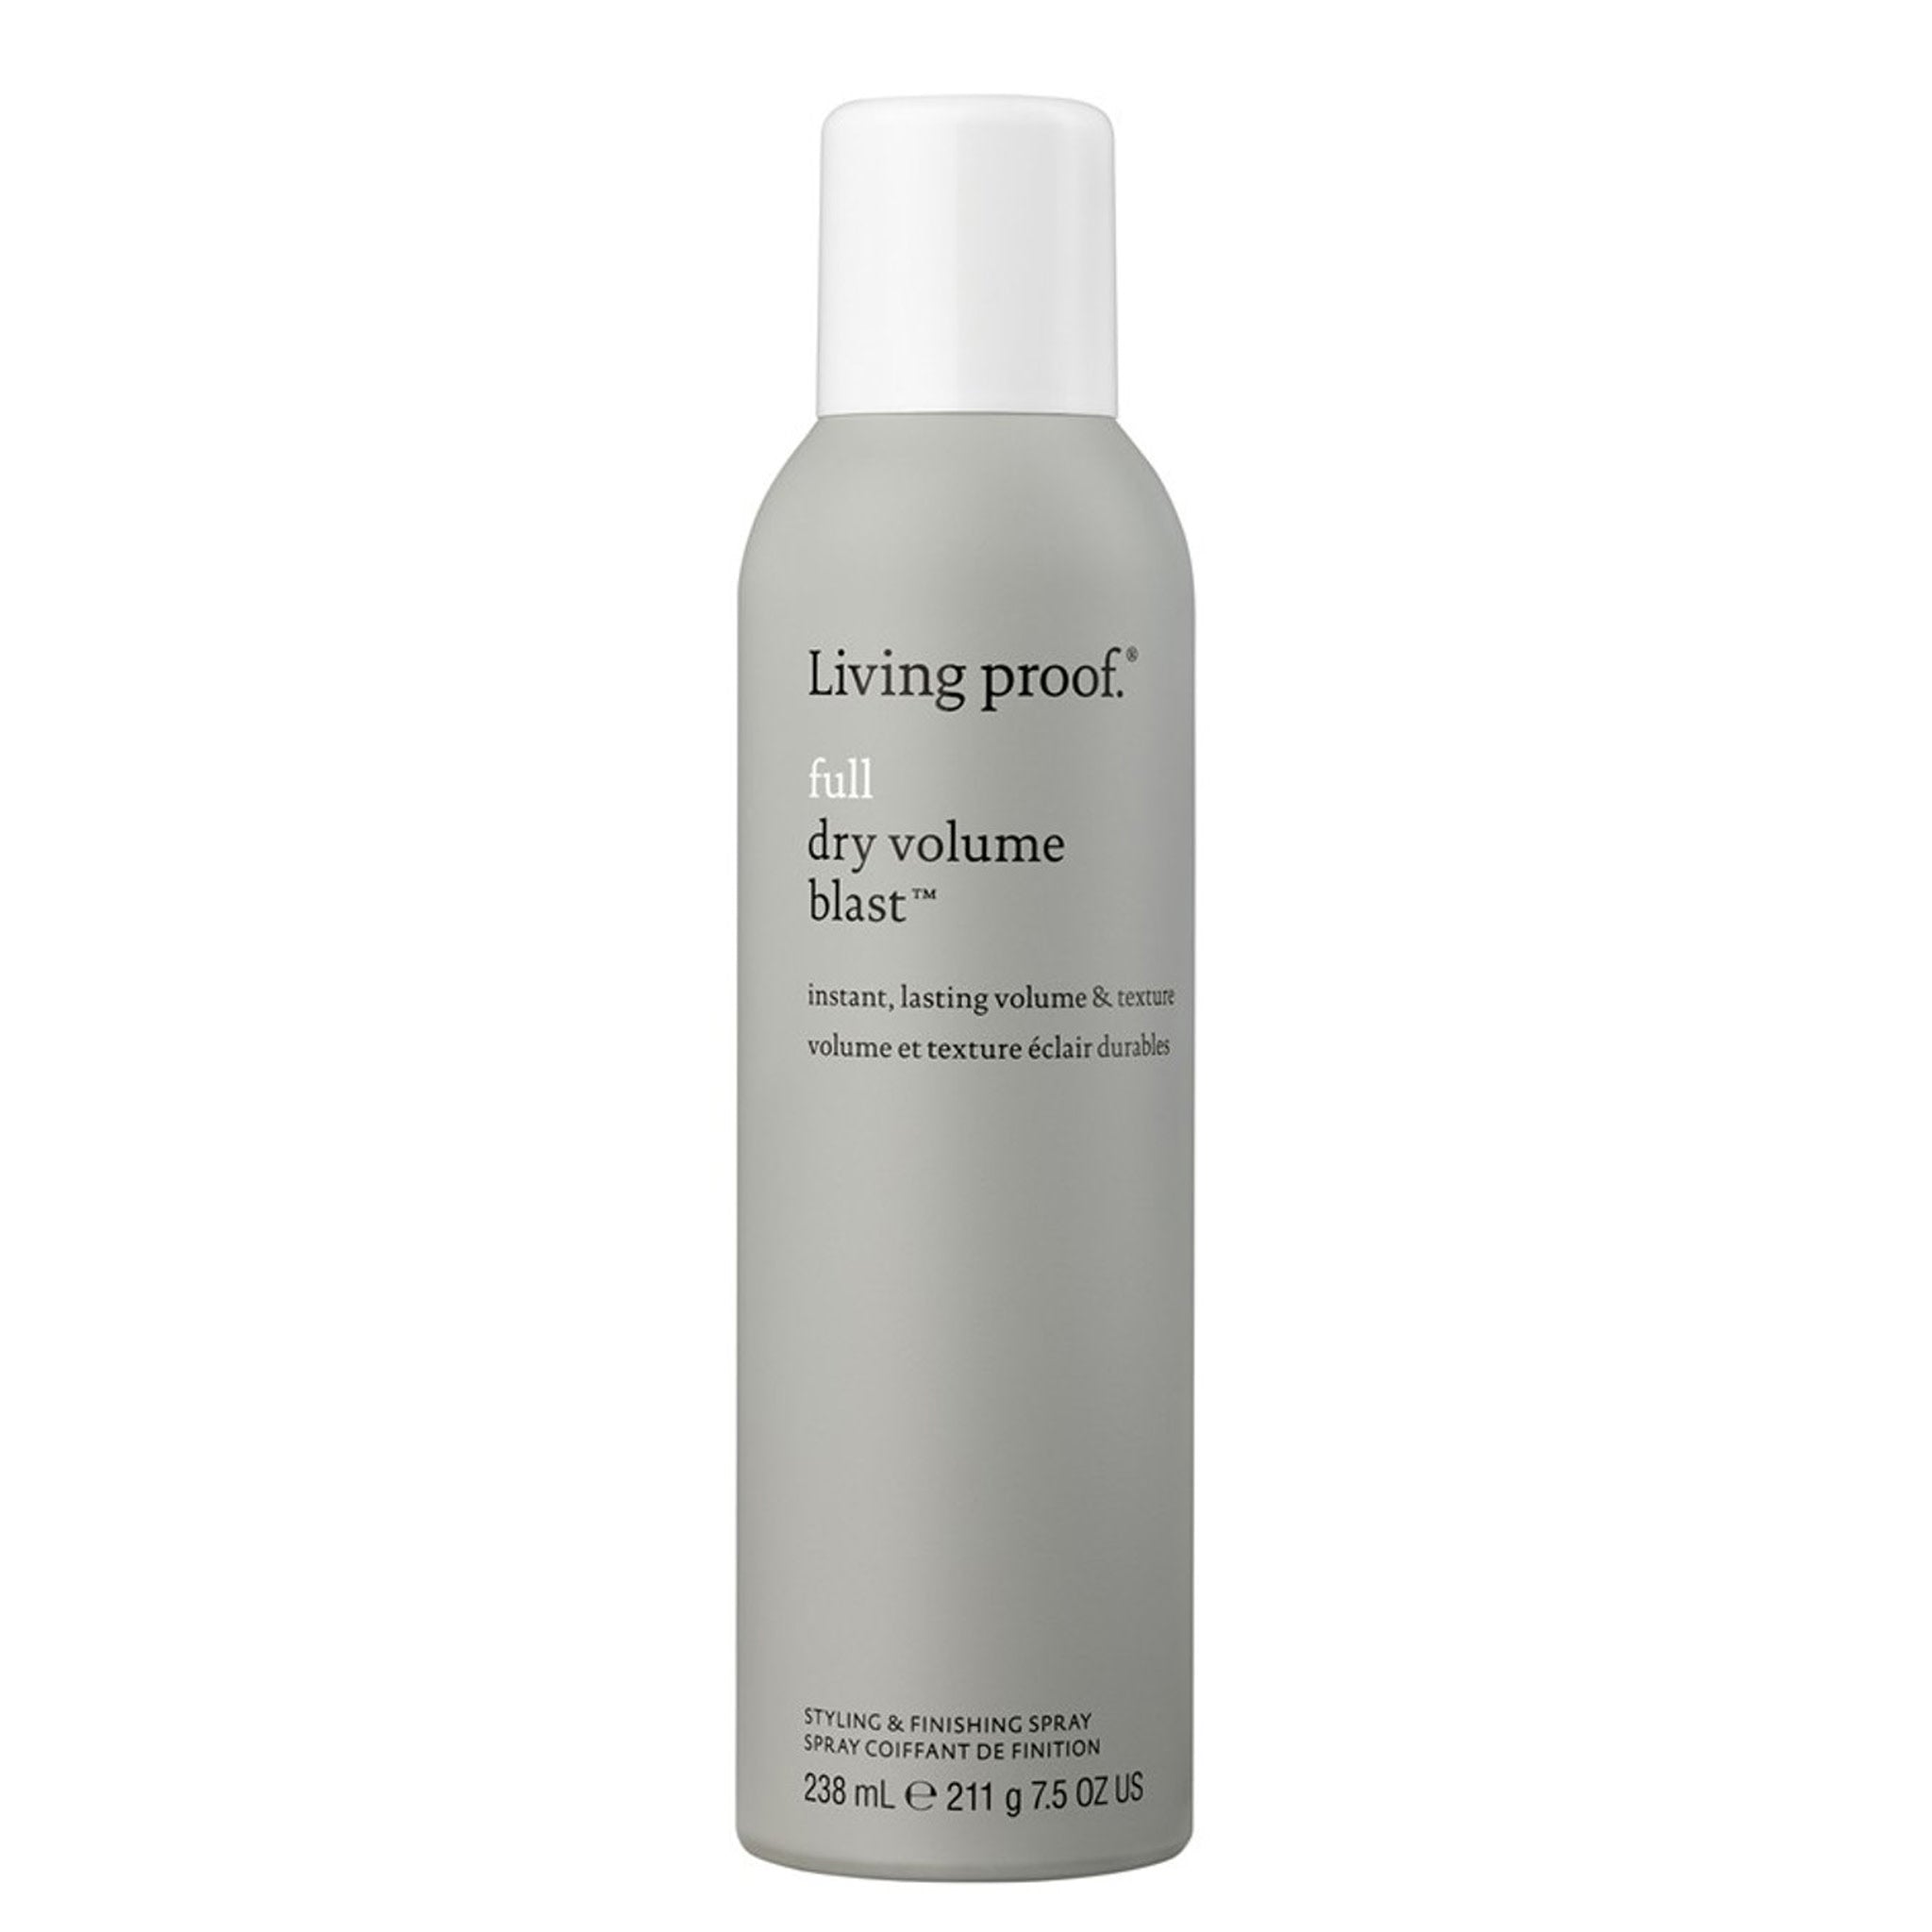 Living Proof Full Dry Volume and Texture Spray main image.